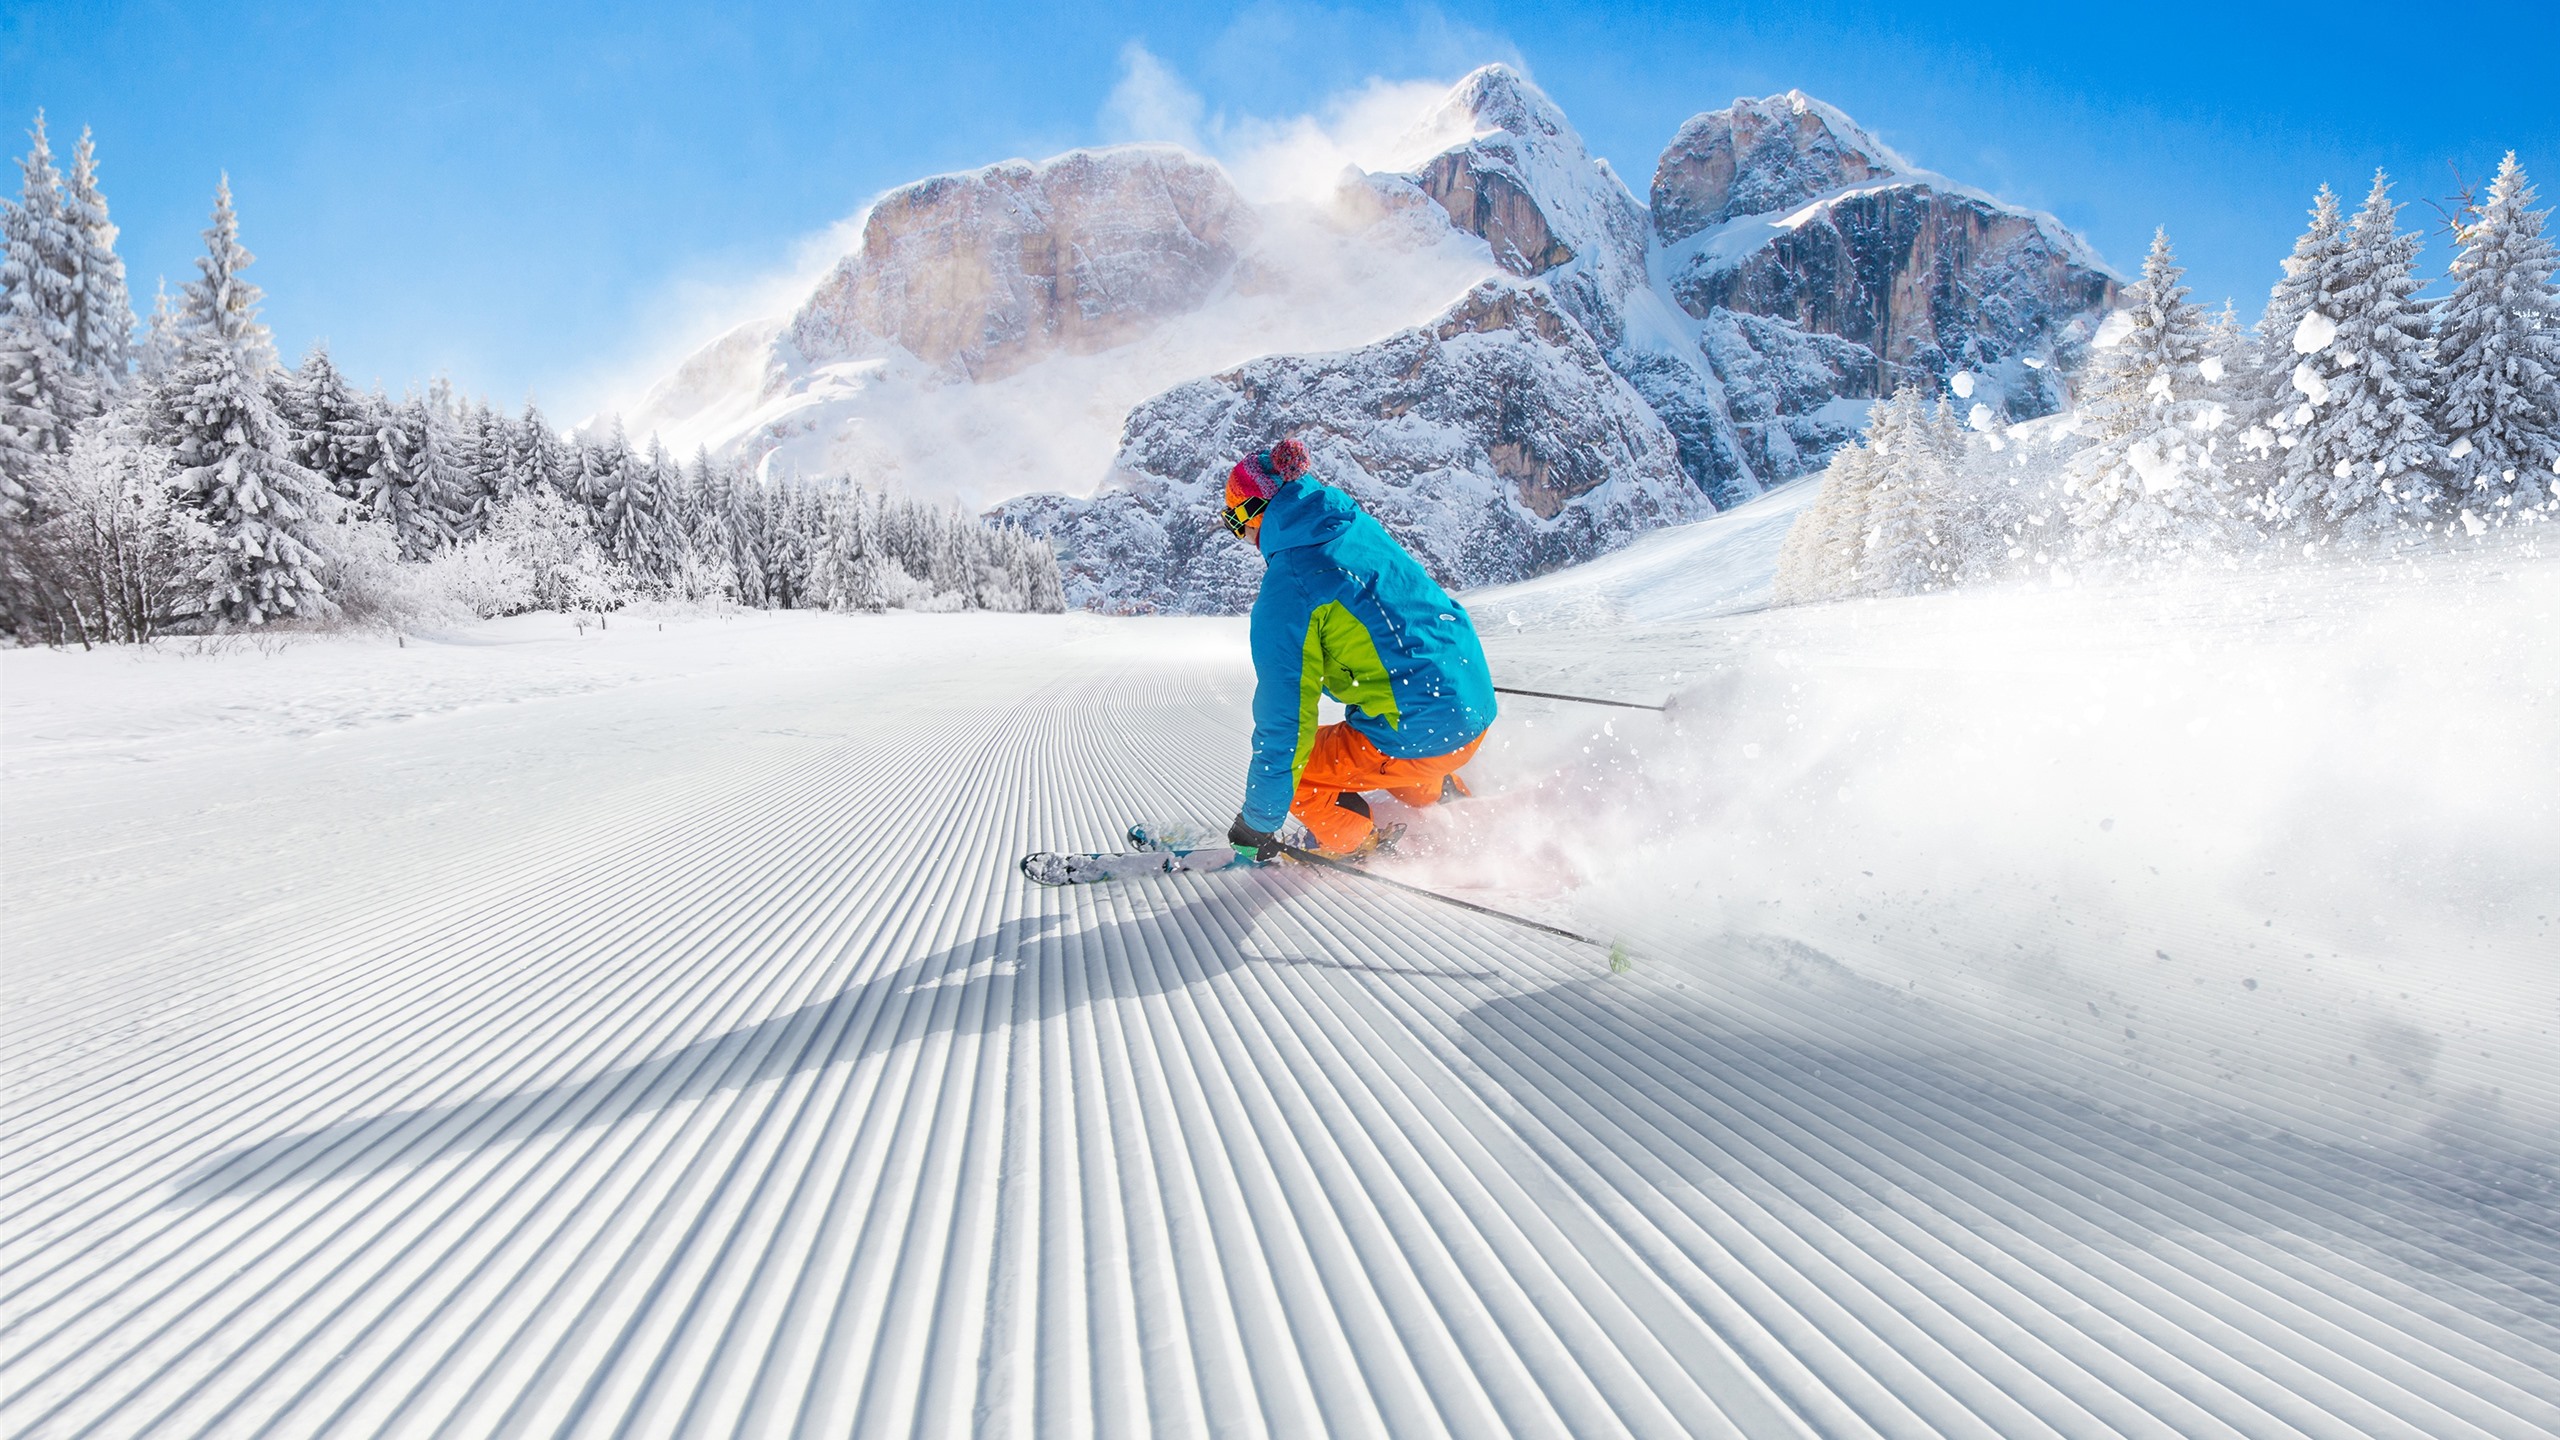 Wallpapers Sport, ski, snow, mountains, winter 2880x1800 HD Picture, Image.